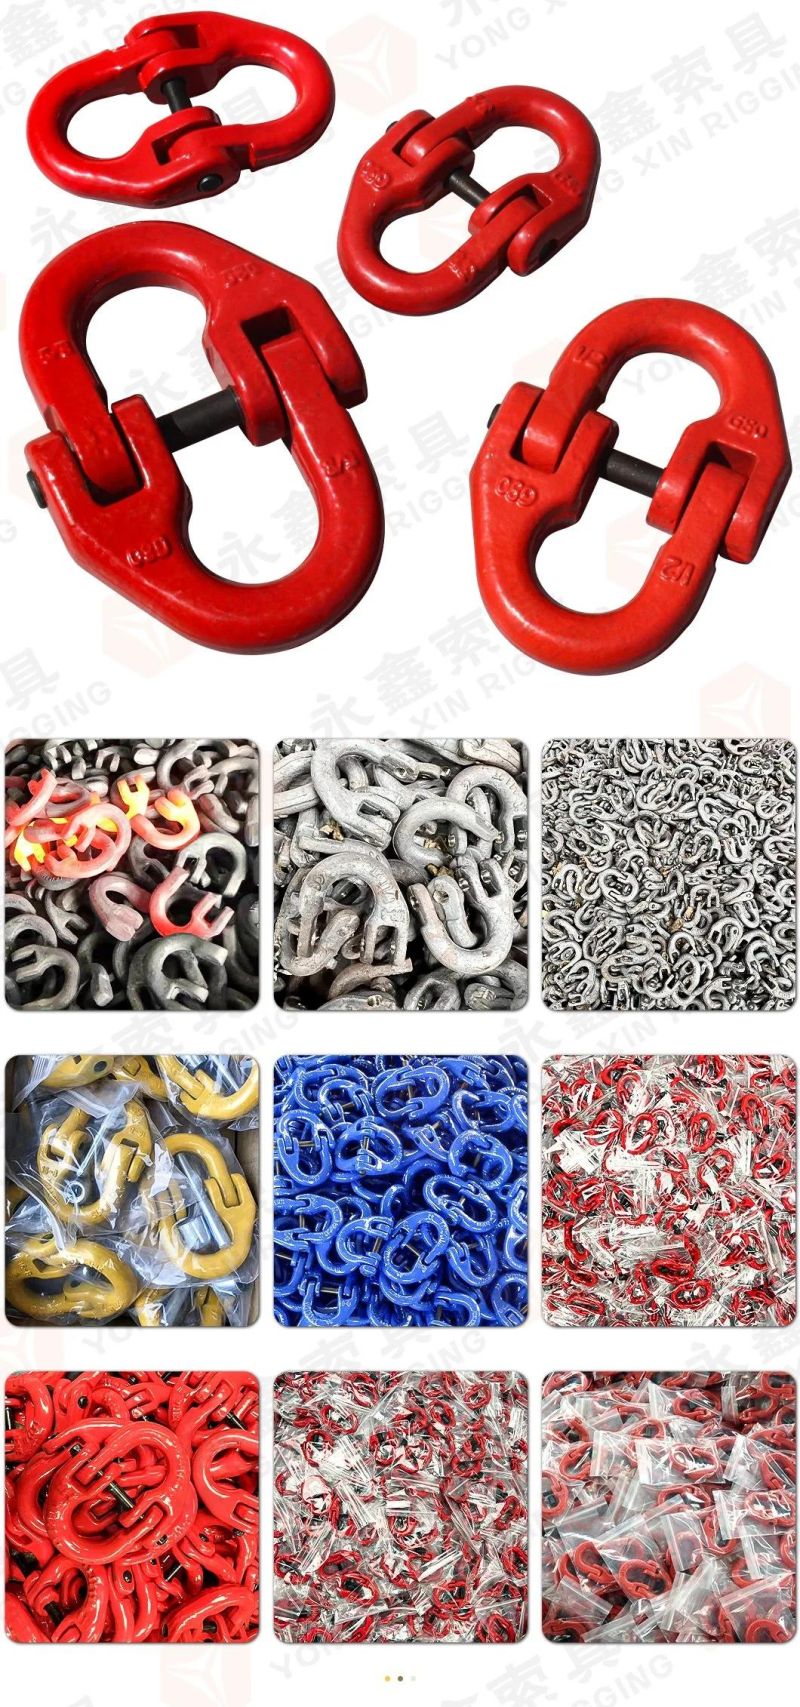 G100 Alloy Steel CE Standard Wll 19t Painted Blue Color Chain Connecting Link